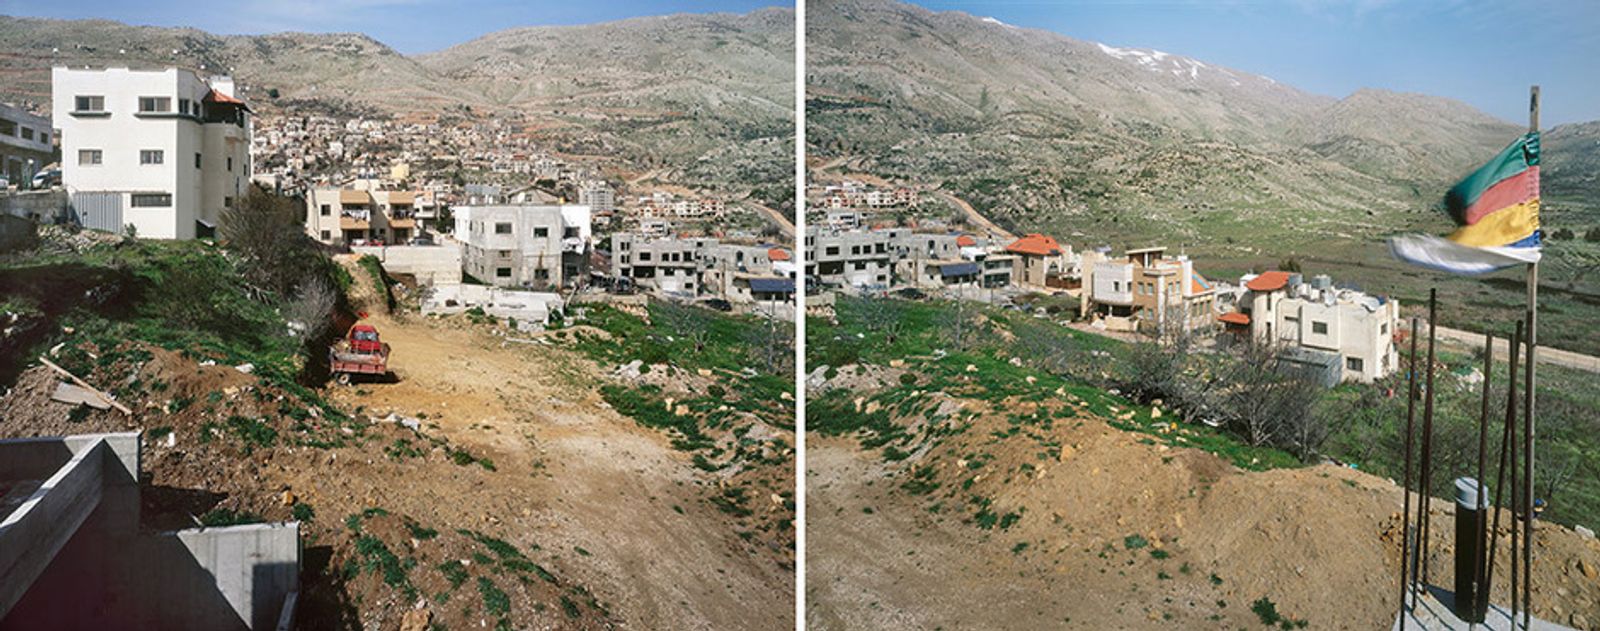 © Yaakov Israel - From the series 'The Legitimacy of Landscape', 2002-2015